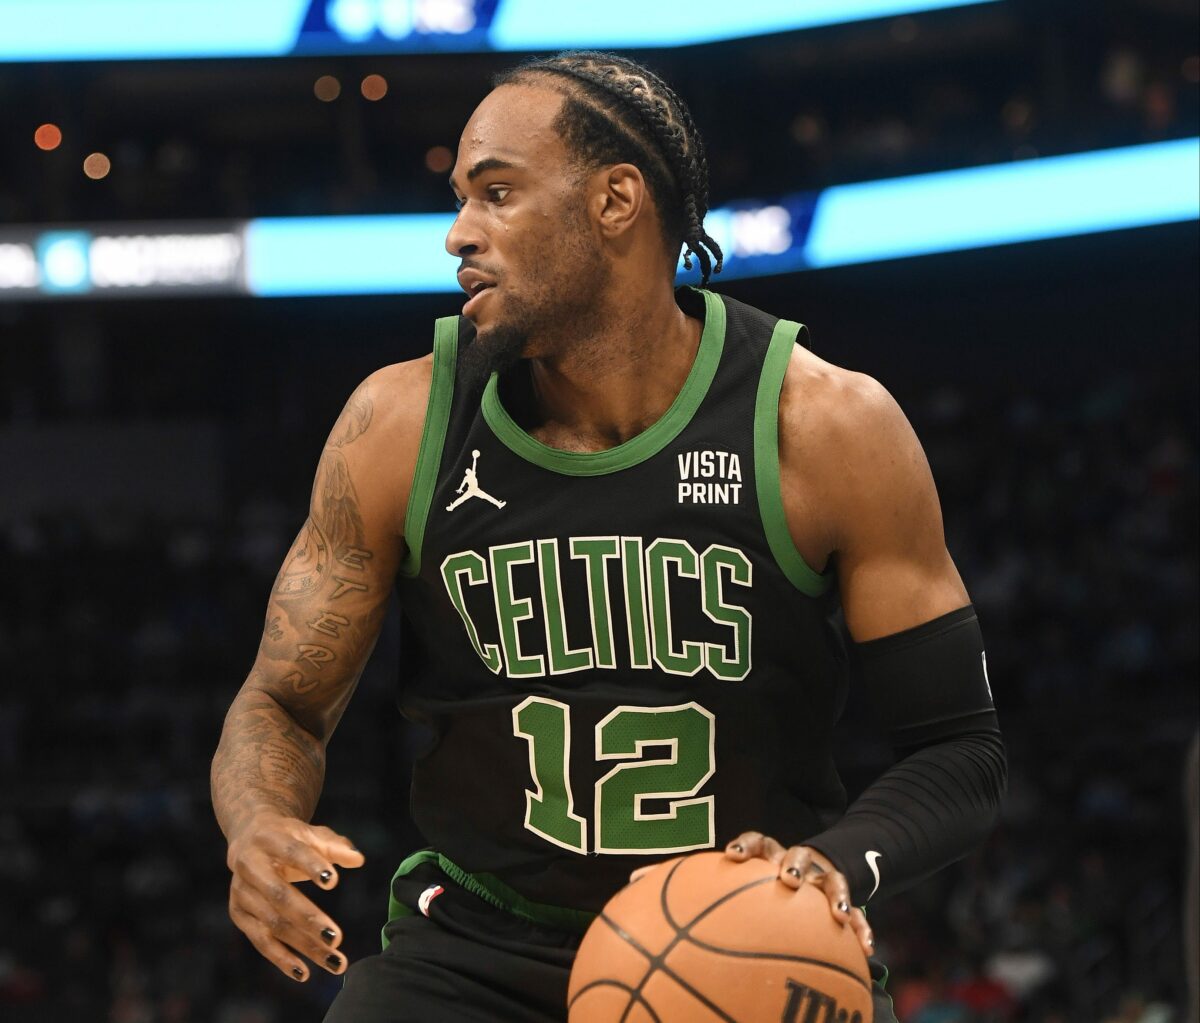 What does Oshae Brissett need to do to earn a bigger role with the Boston Celtics?